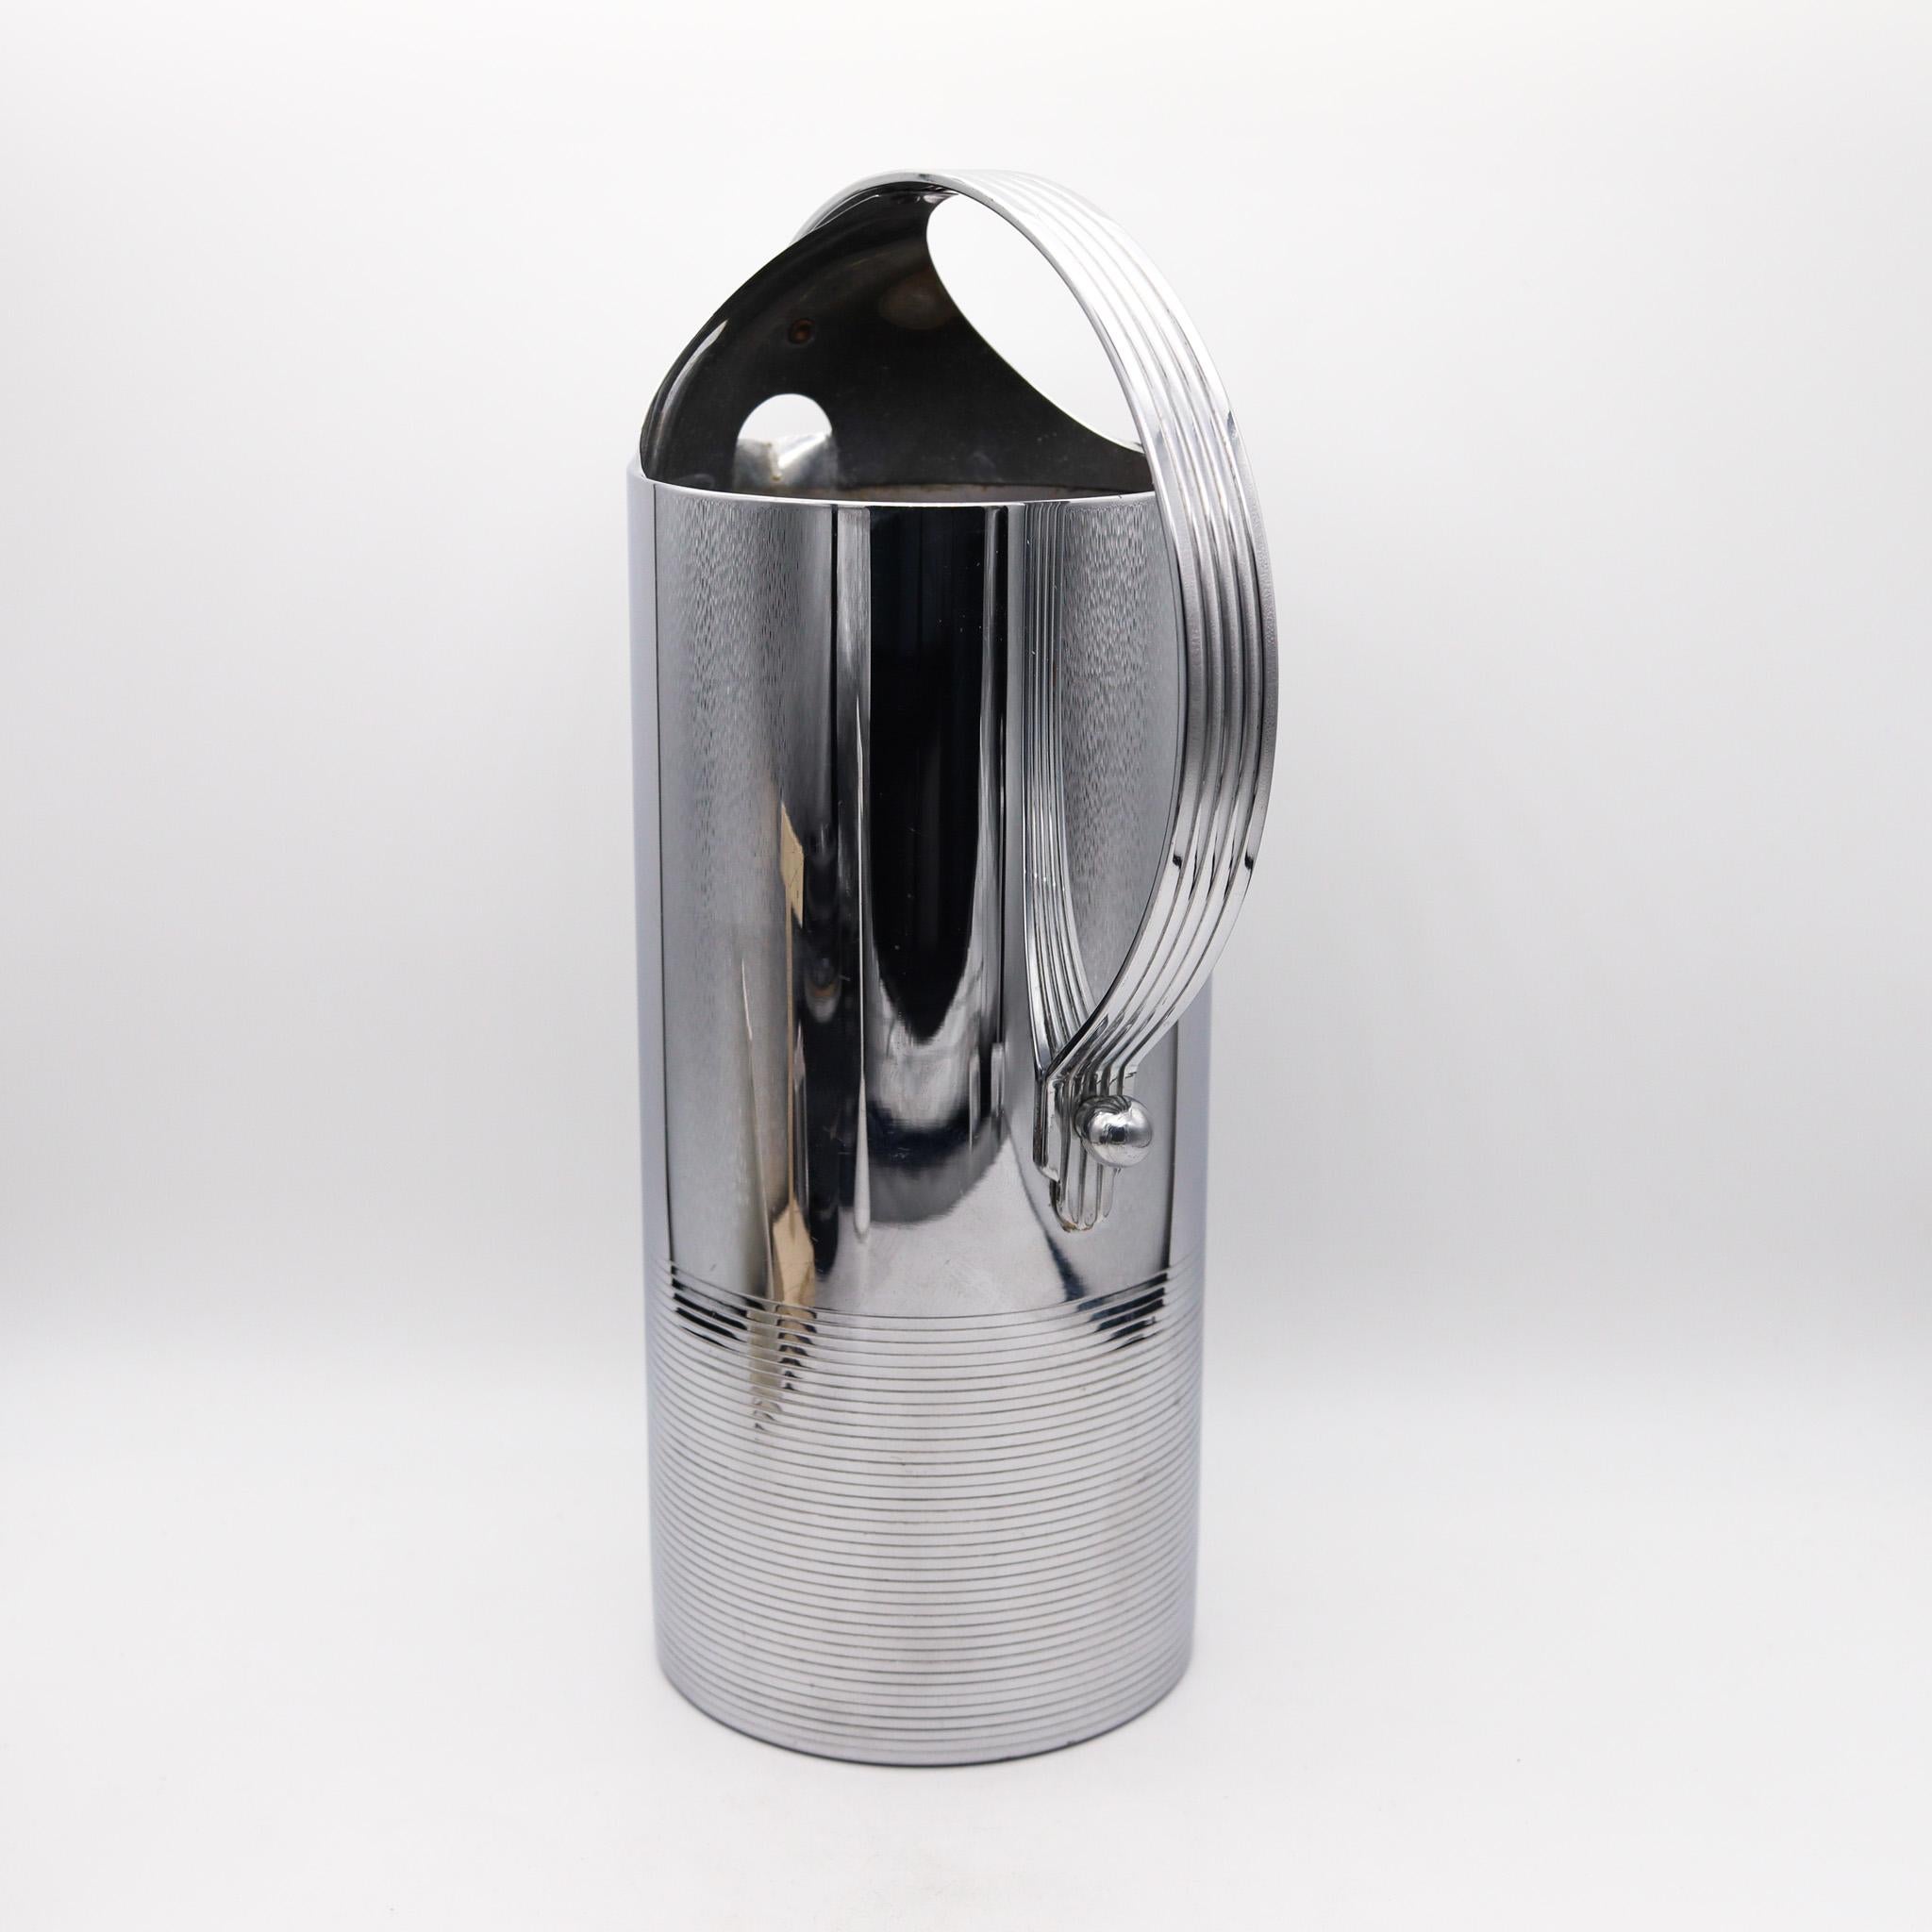 North American Manning Bowman 1930 By Bel Geddes Art Deco Machine Age Pitcher In Chromed Steel For Sale